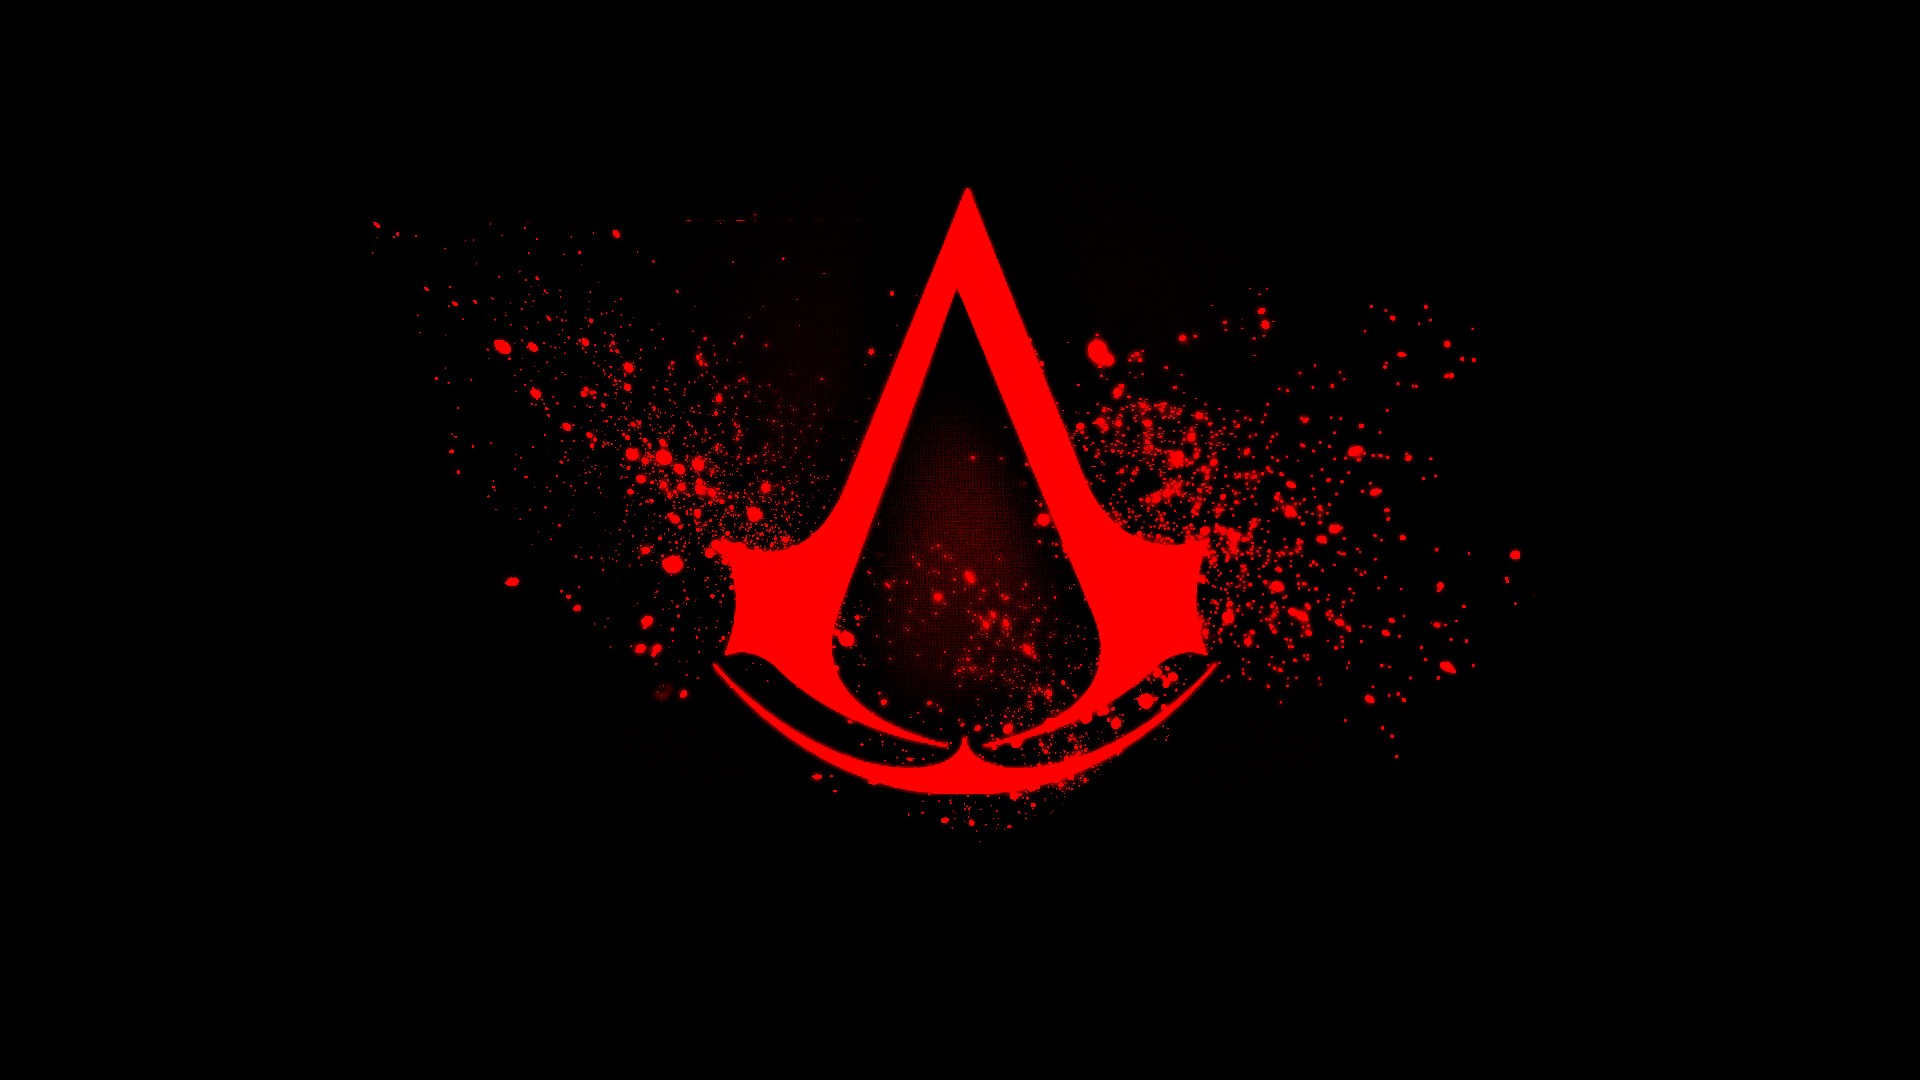 General 1920x1080 Assassin's Creed Assassin's Creed: Revelations Assassin's Creed 2 Ezio Auditore da Firenze video games PC gaming simple background